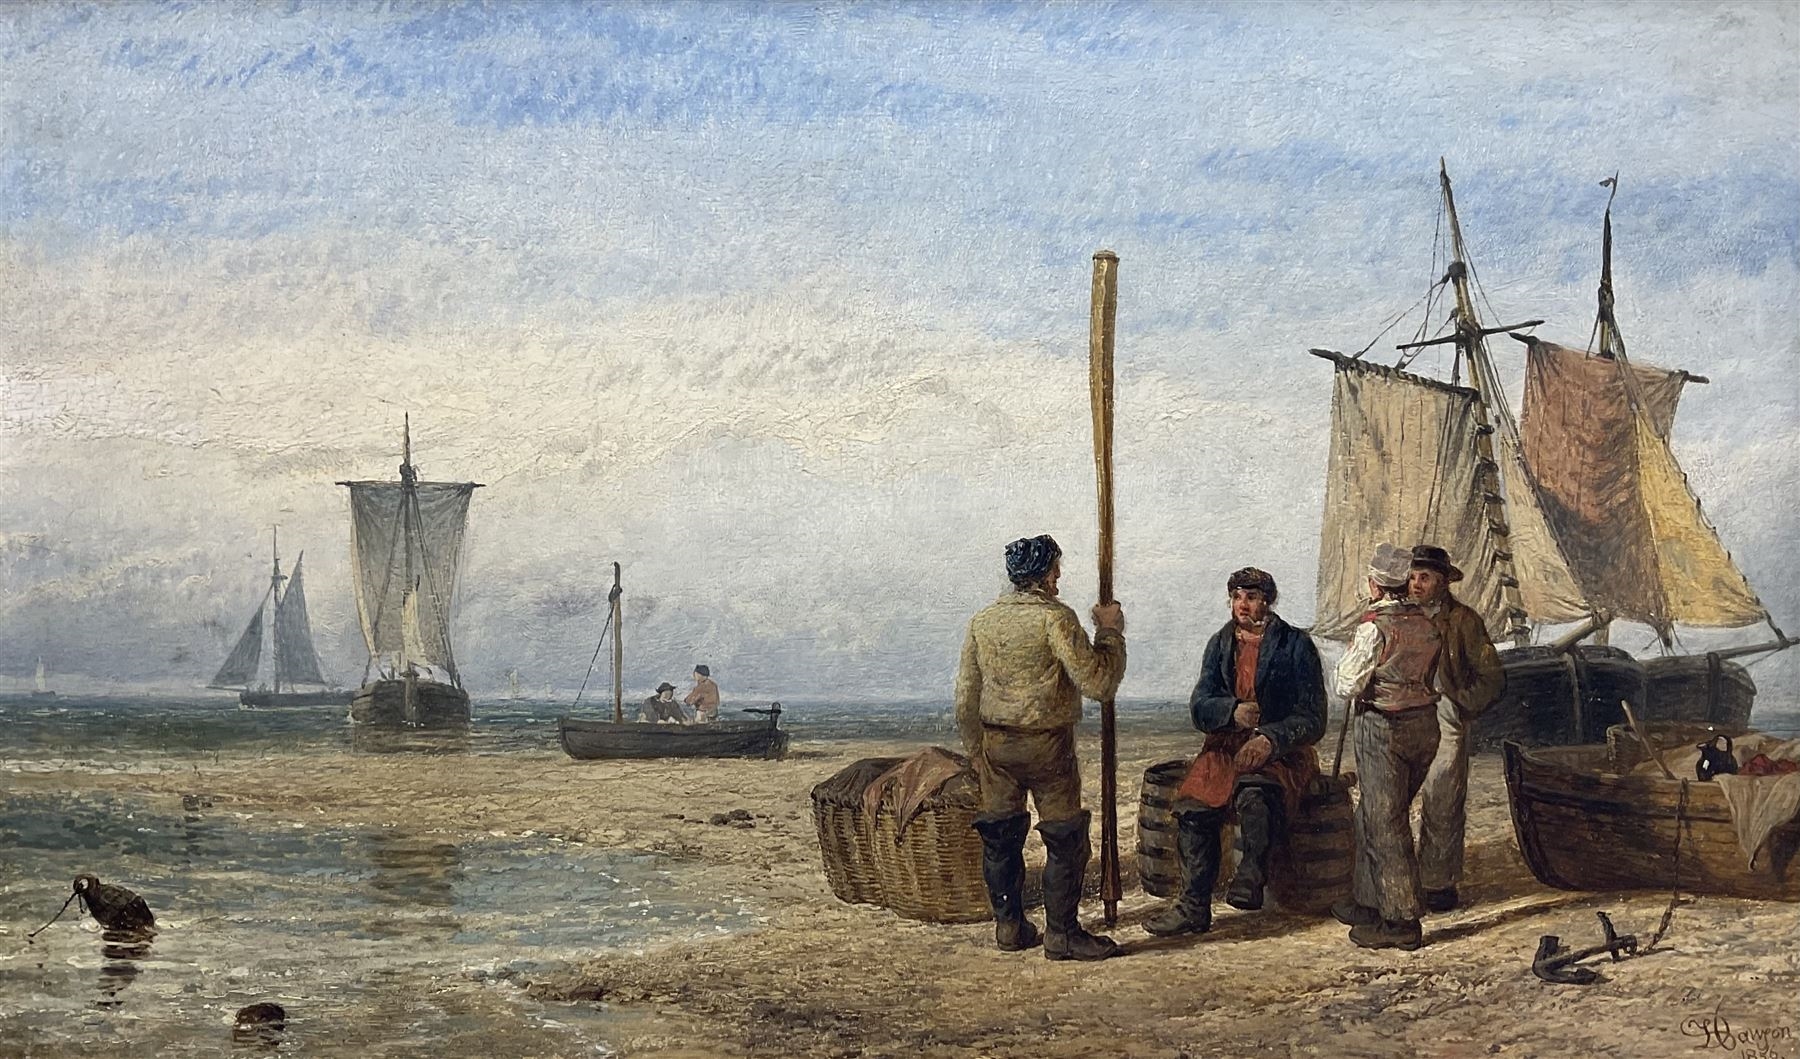 Fishermen in Discussion on the Beach by Henry Dawson, dated 1856